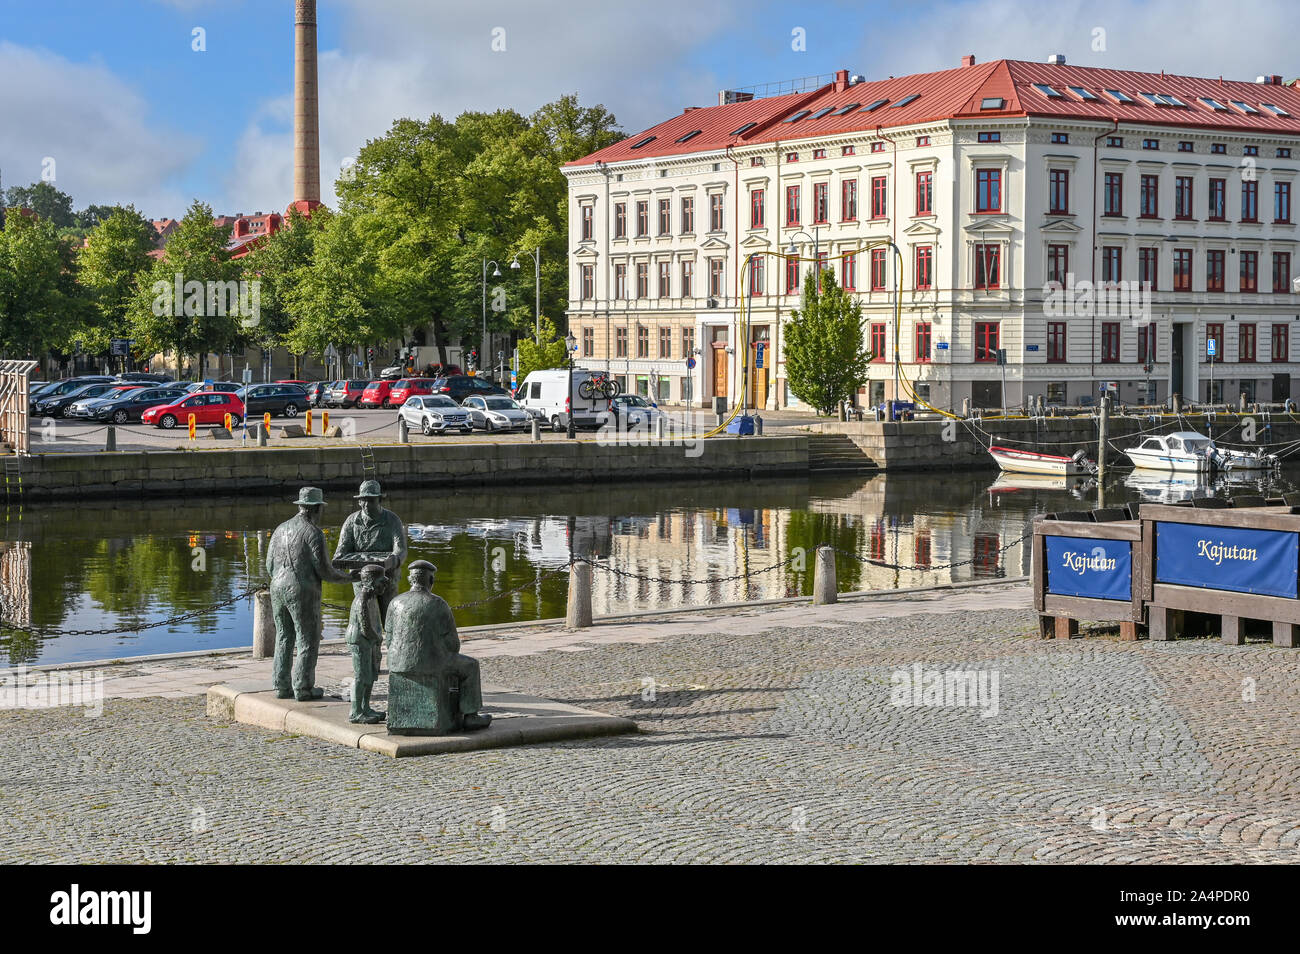 The small square by the fish market in Gothenburg, Sweden with sculpture group Skärgårdsfiskare depicting fishermen from the west coast archipelago Stock Photo